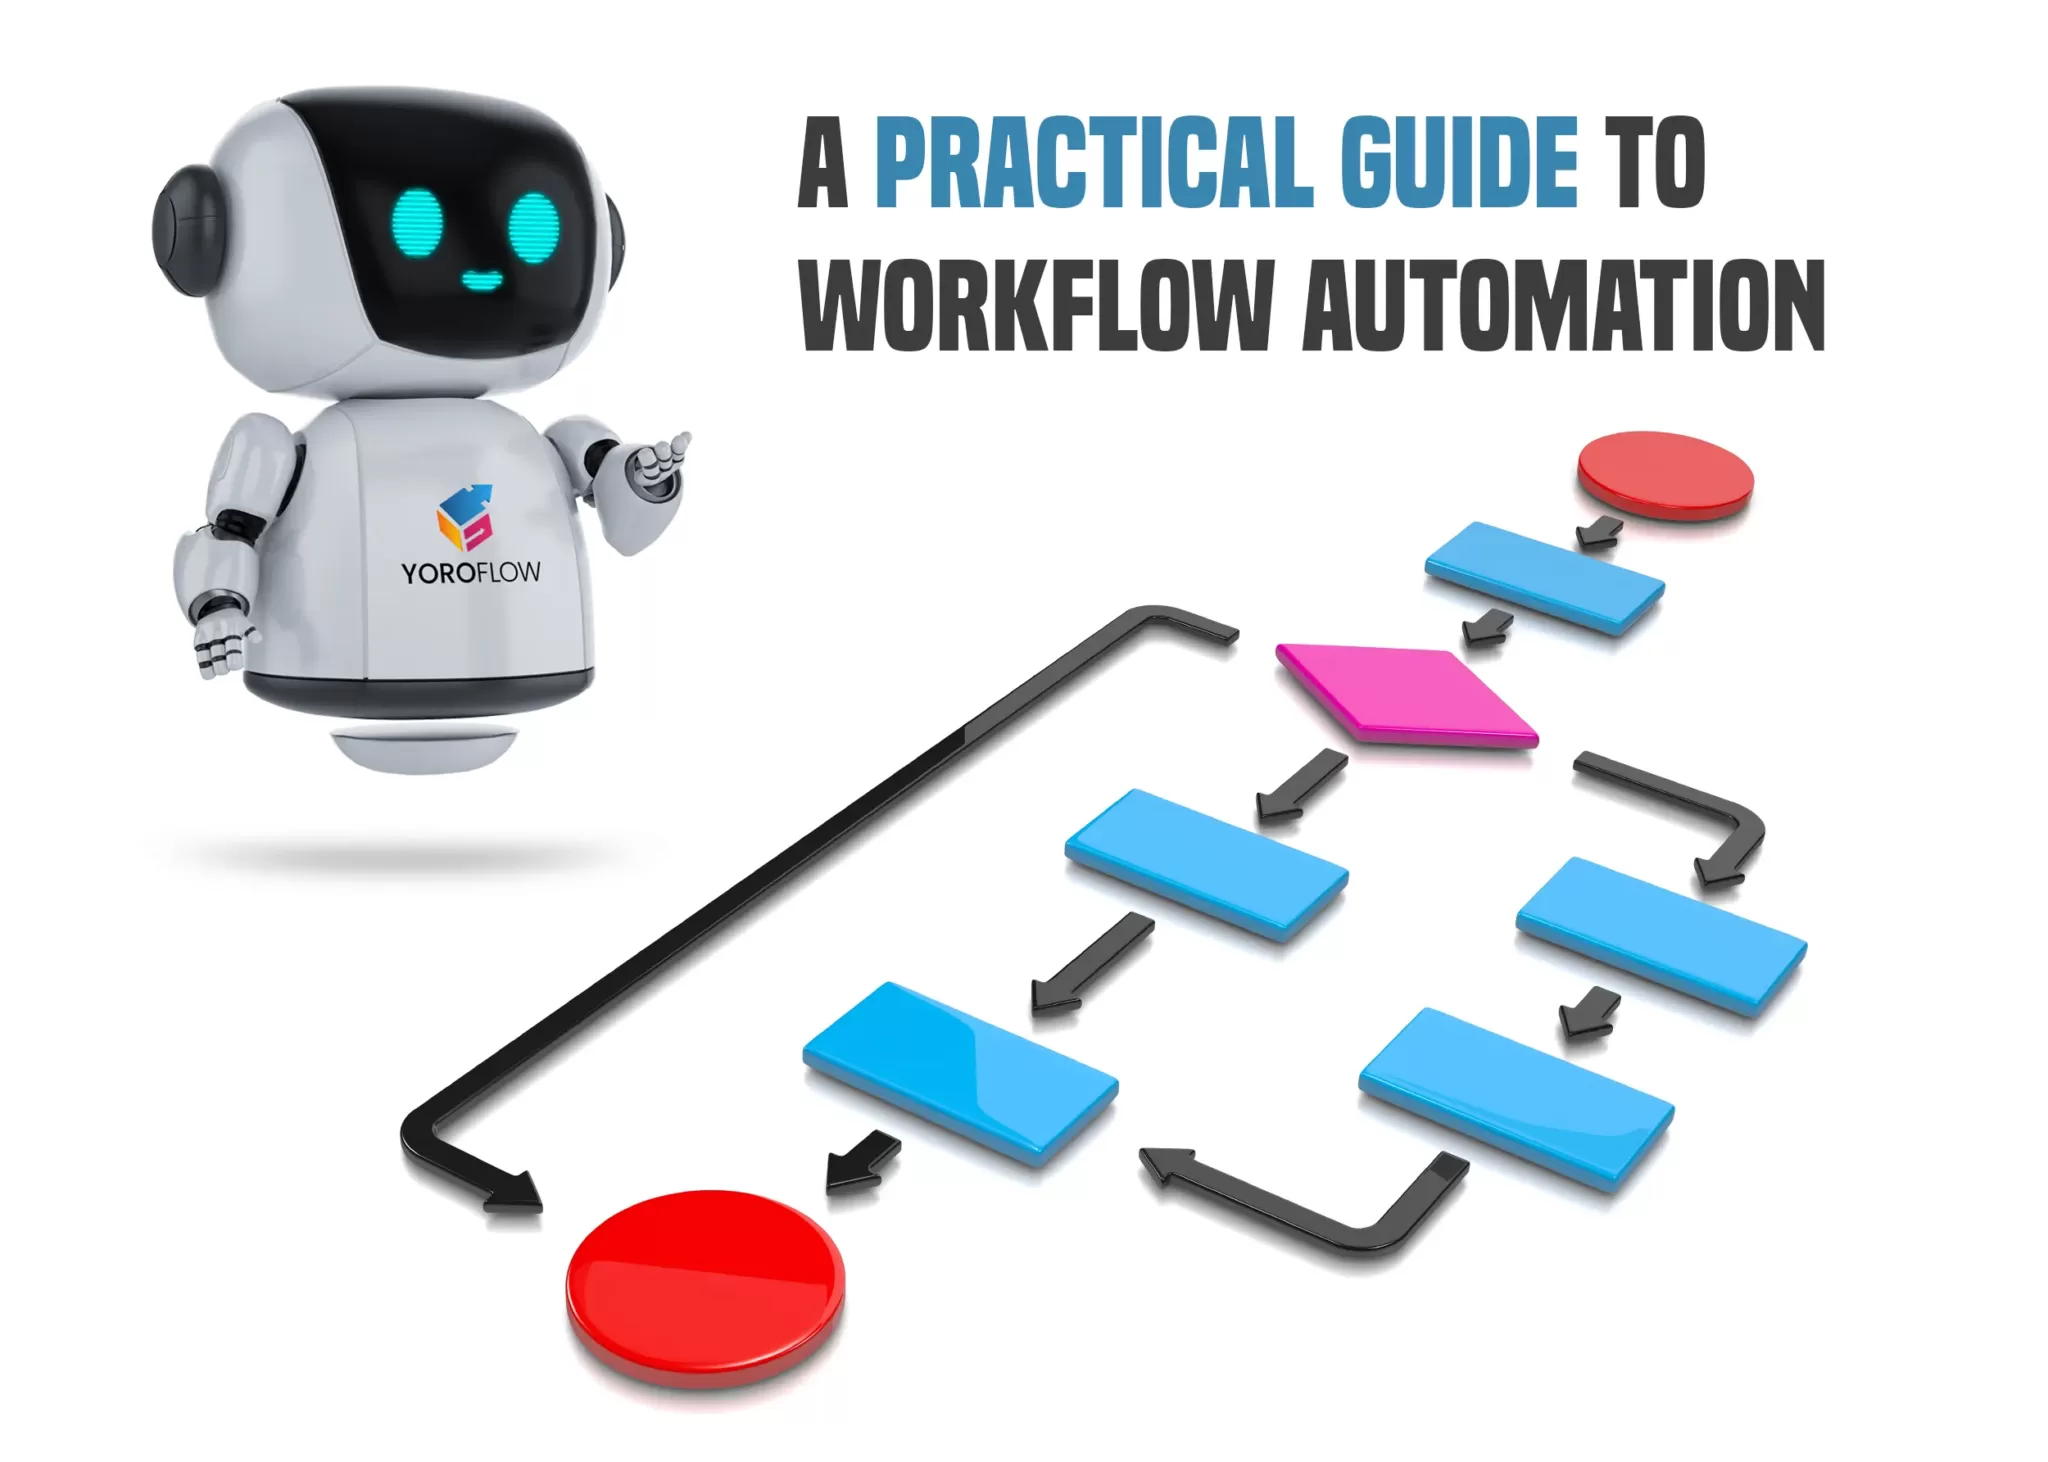 A Practical Guide to Workflow Automation